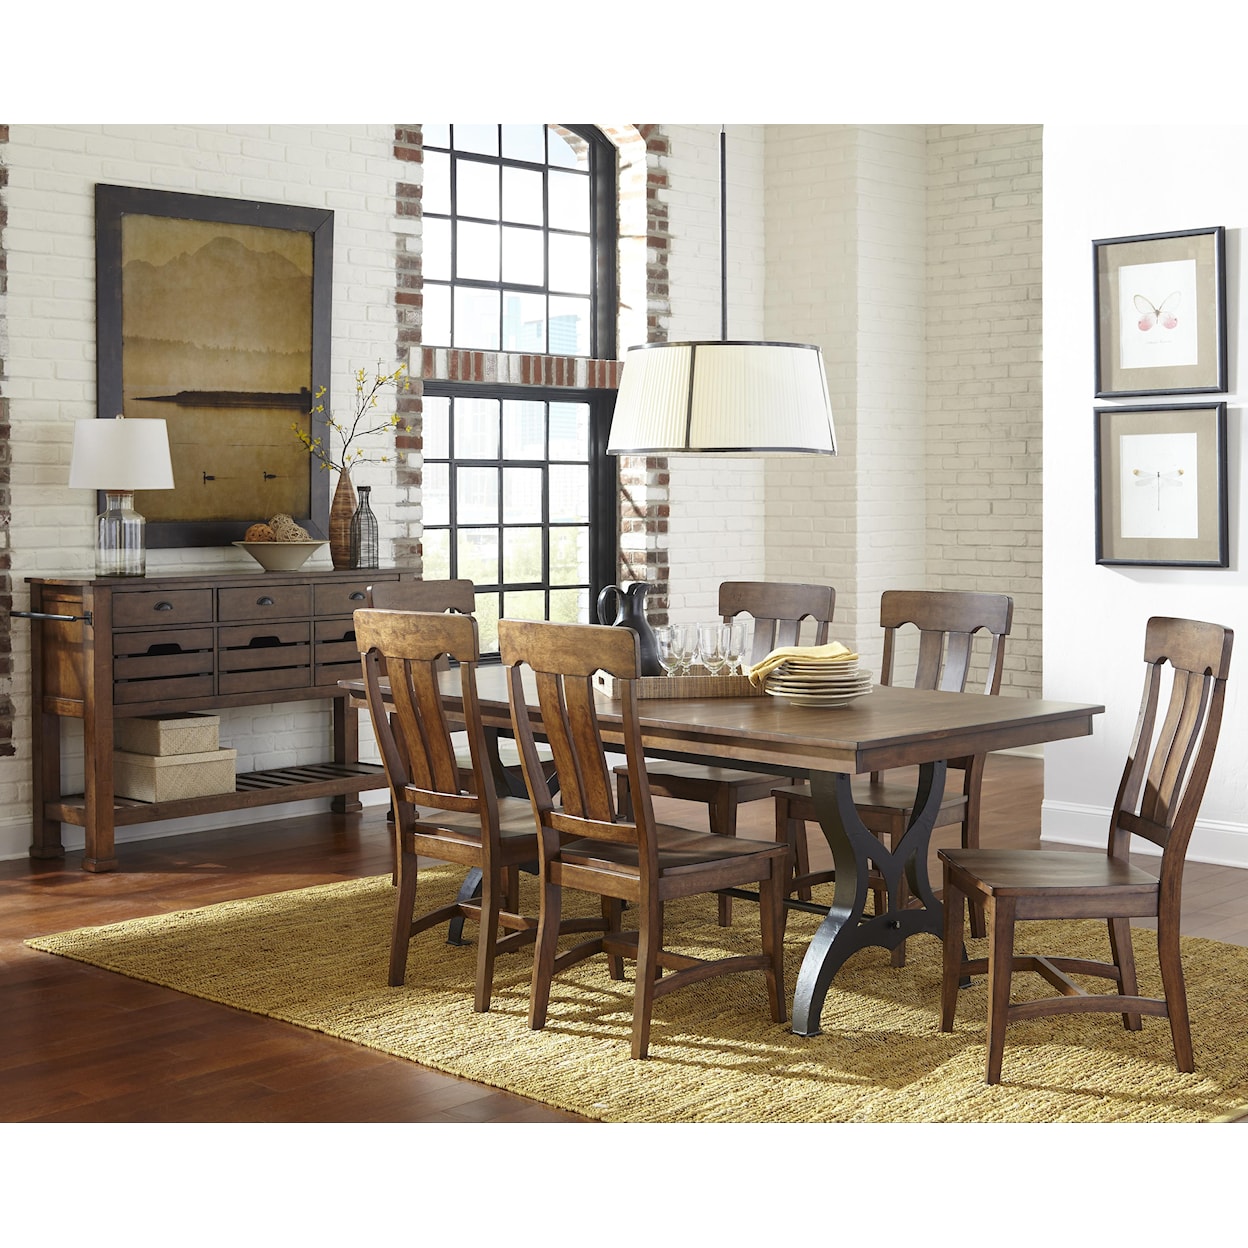 Intercon The District Formal Dining Room Group